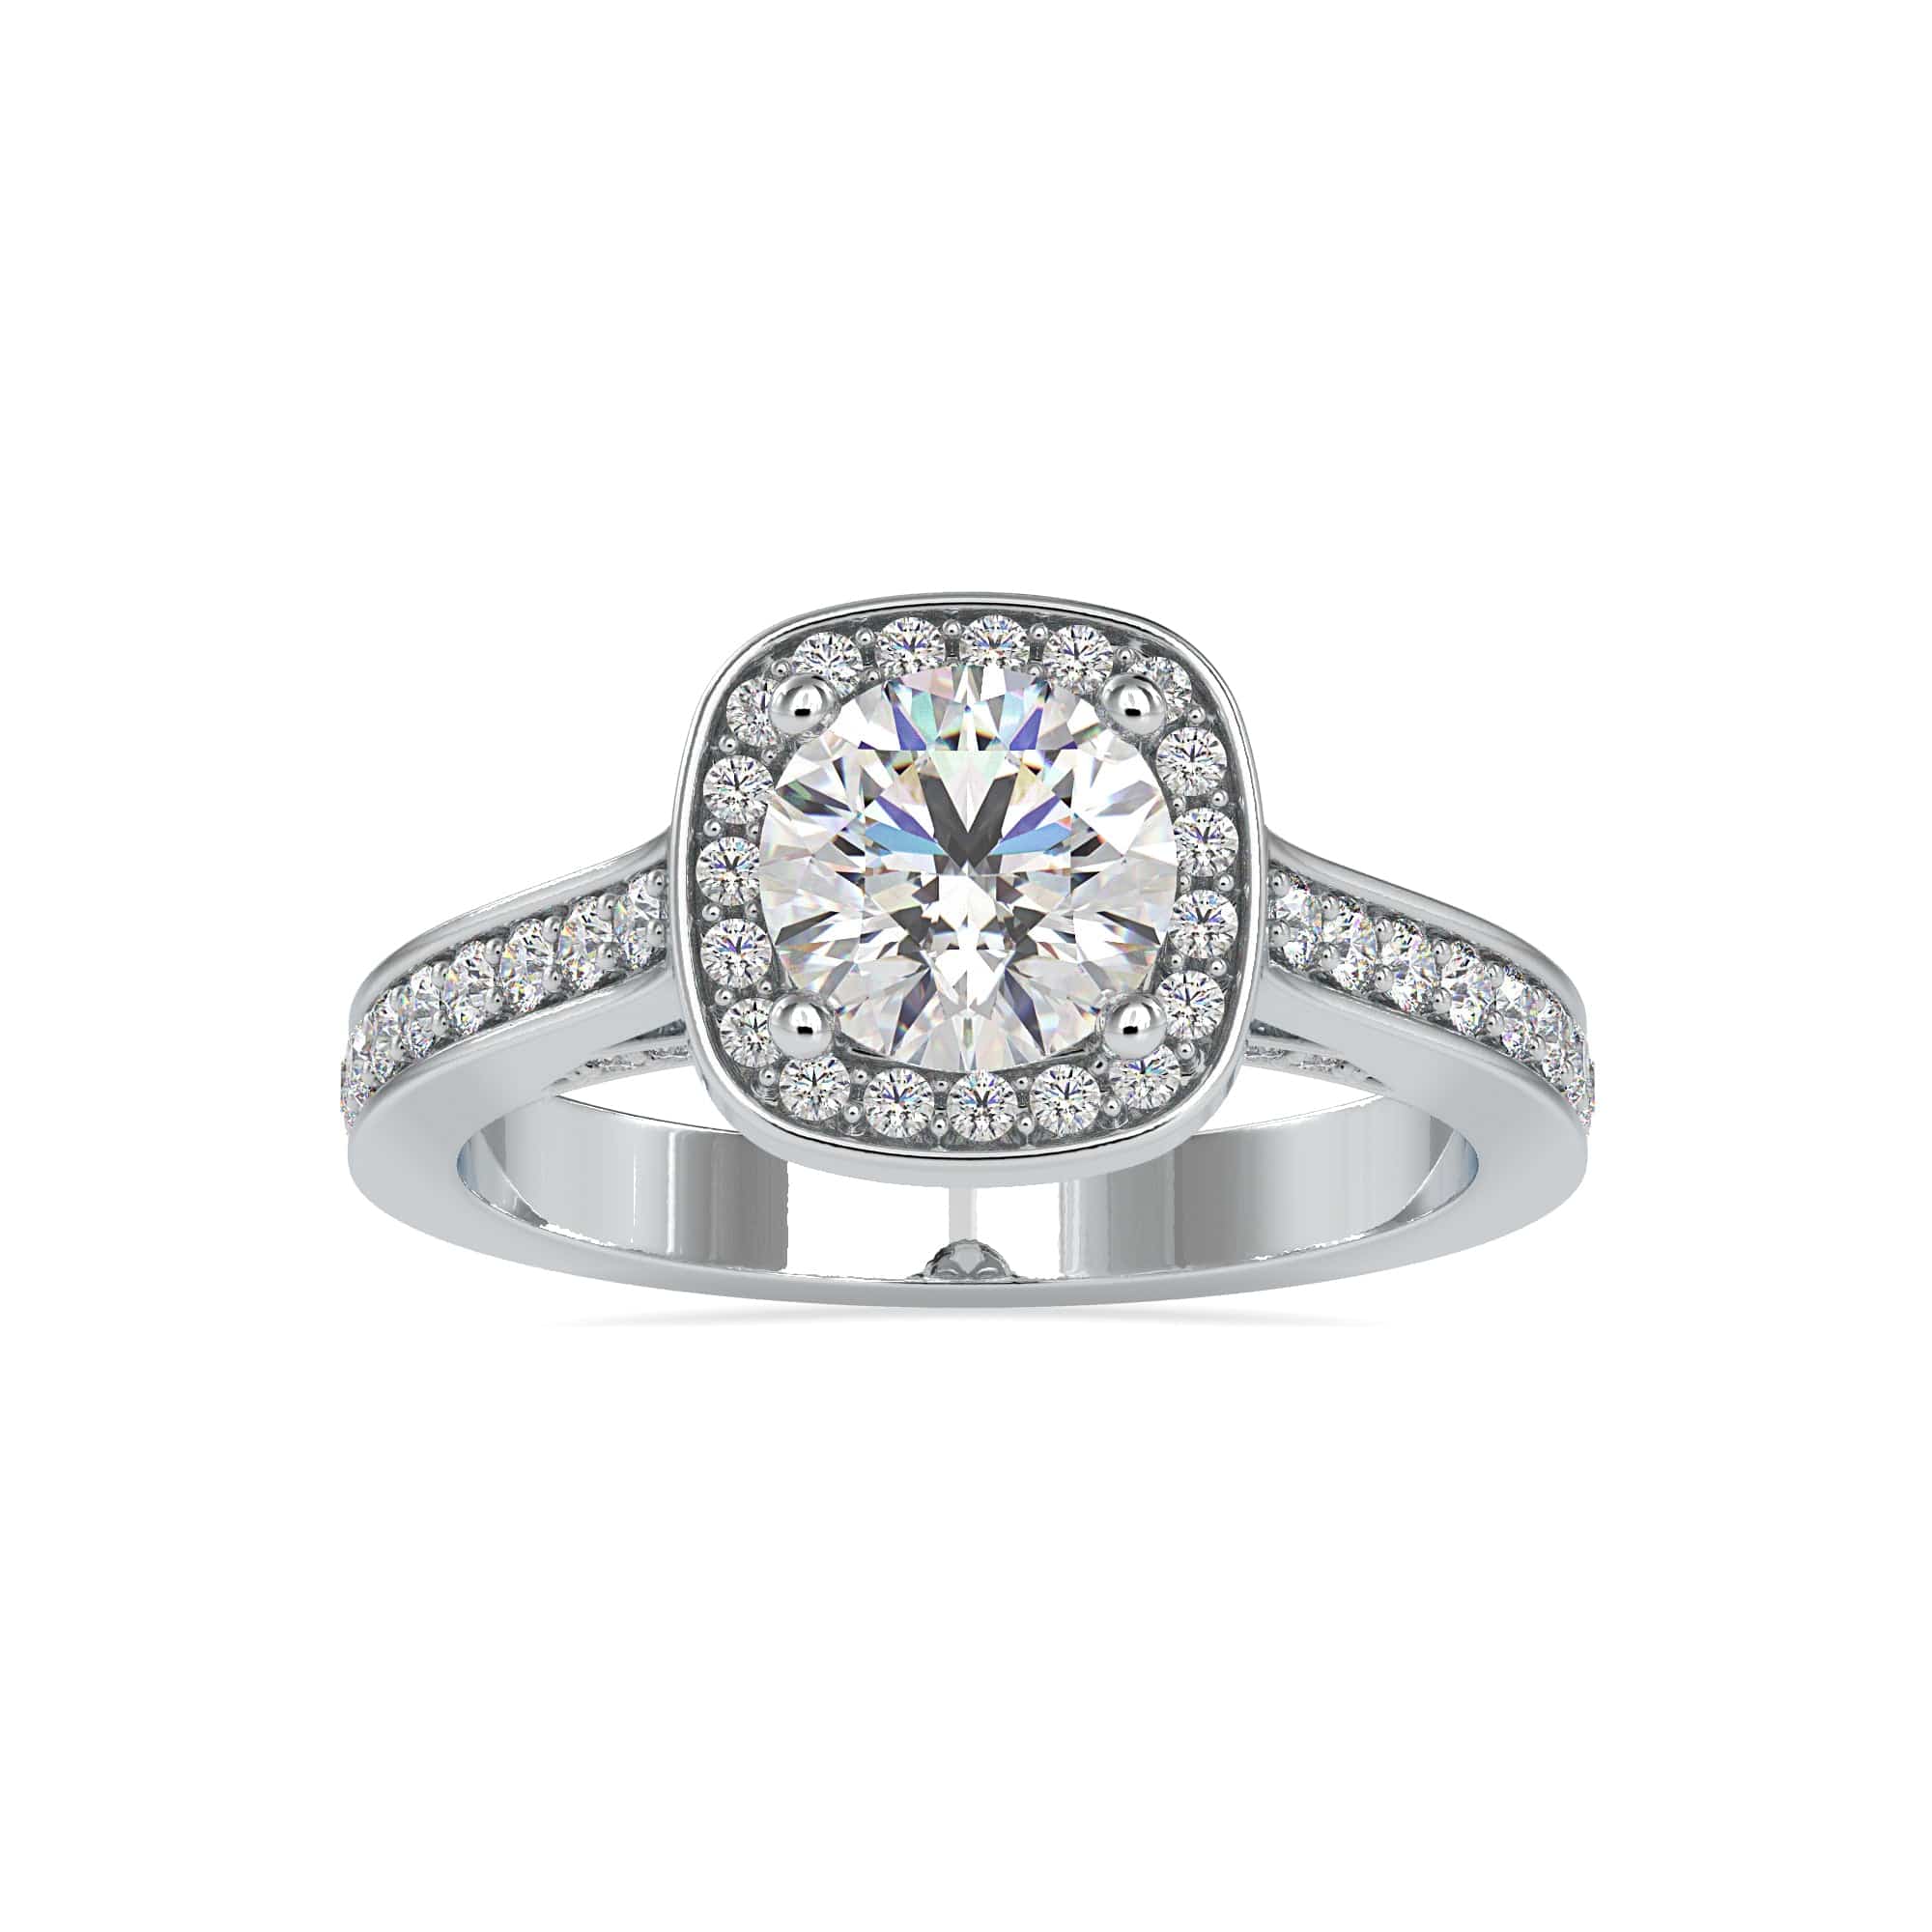 Buy quality 925 sterling silver single diamond Ring FOR MEN in Ahmedabad